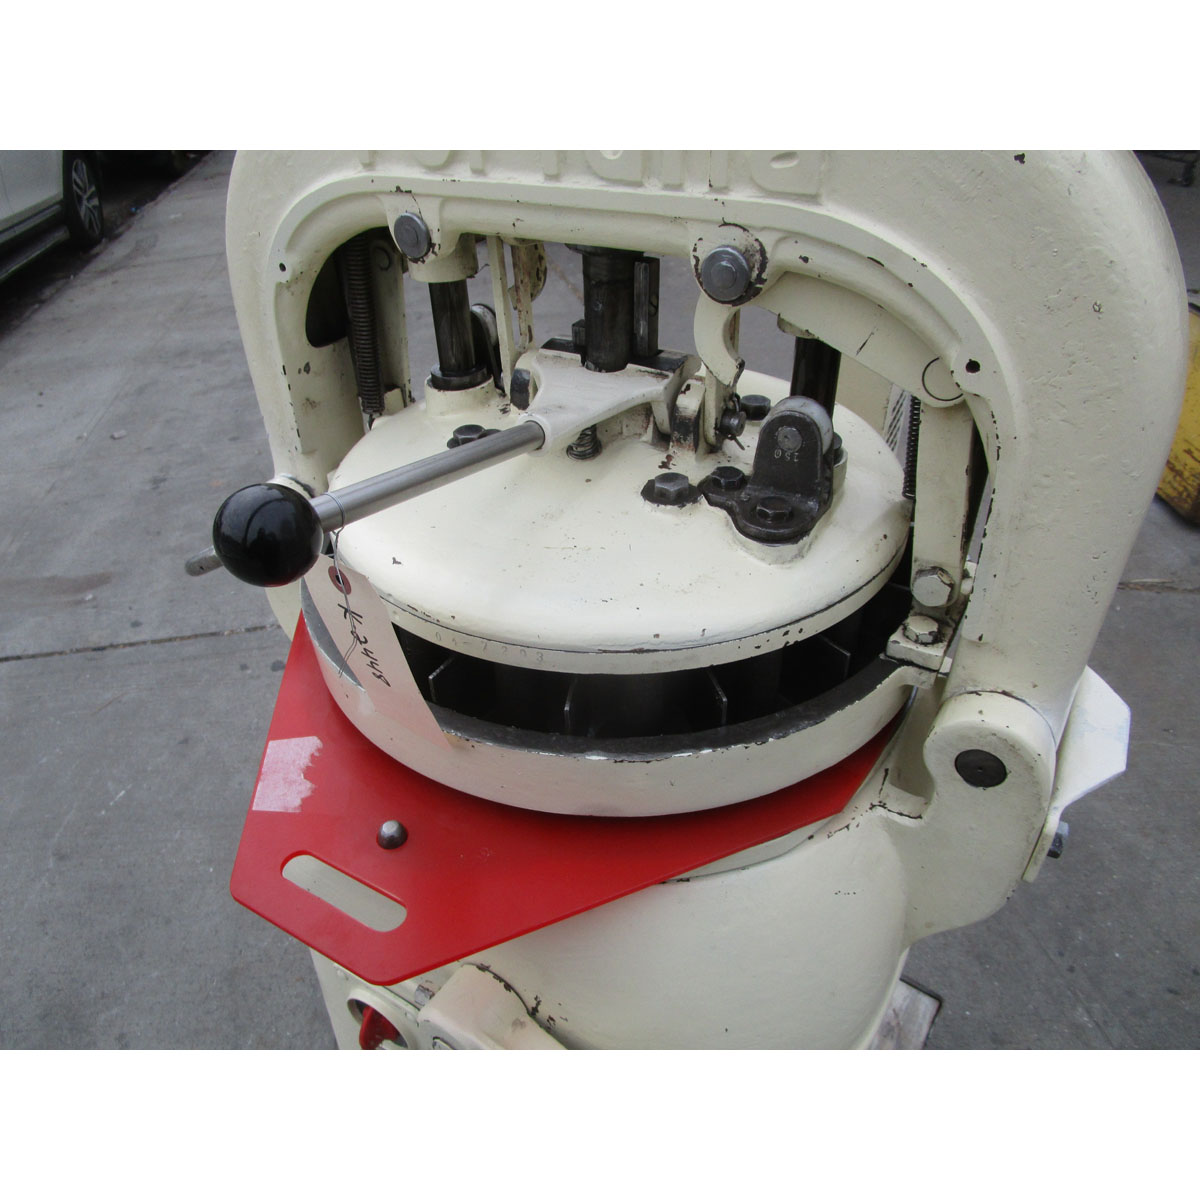 Fortuna Used Semi Automatic Divider Rounder Model 4-30, Size 4, 30 Parts, Good Working Condition image 5